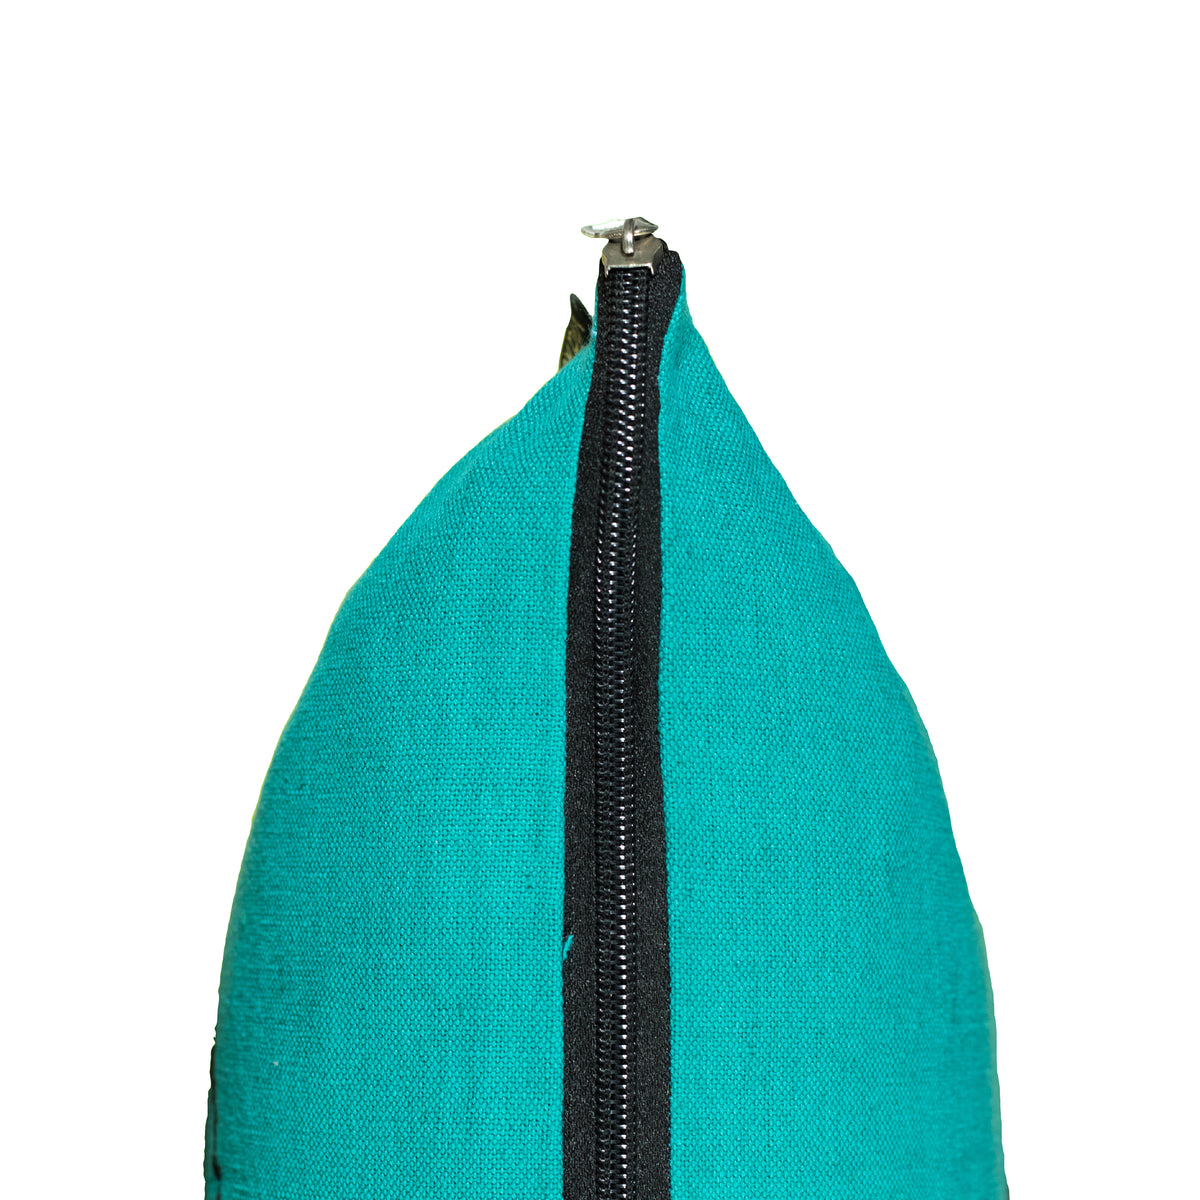 Heads or Tails — Fish Cushion Cover (Marine Green)